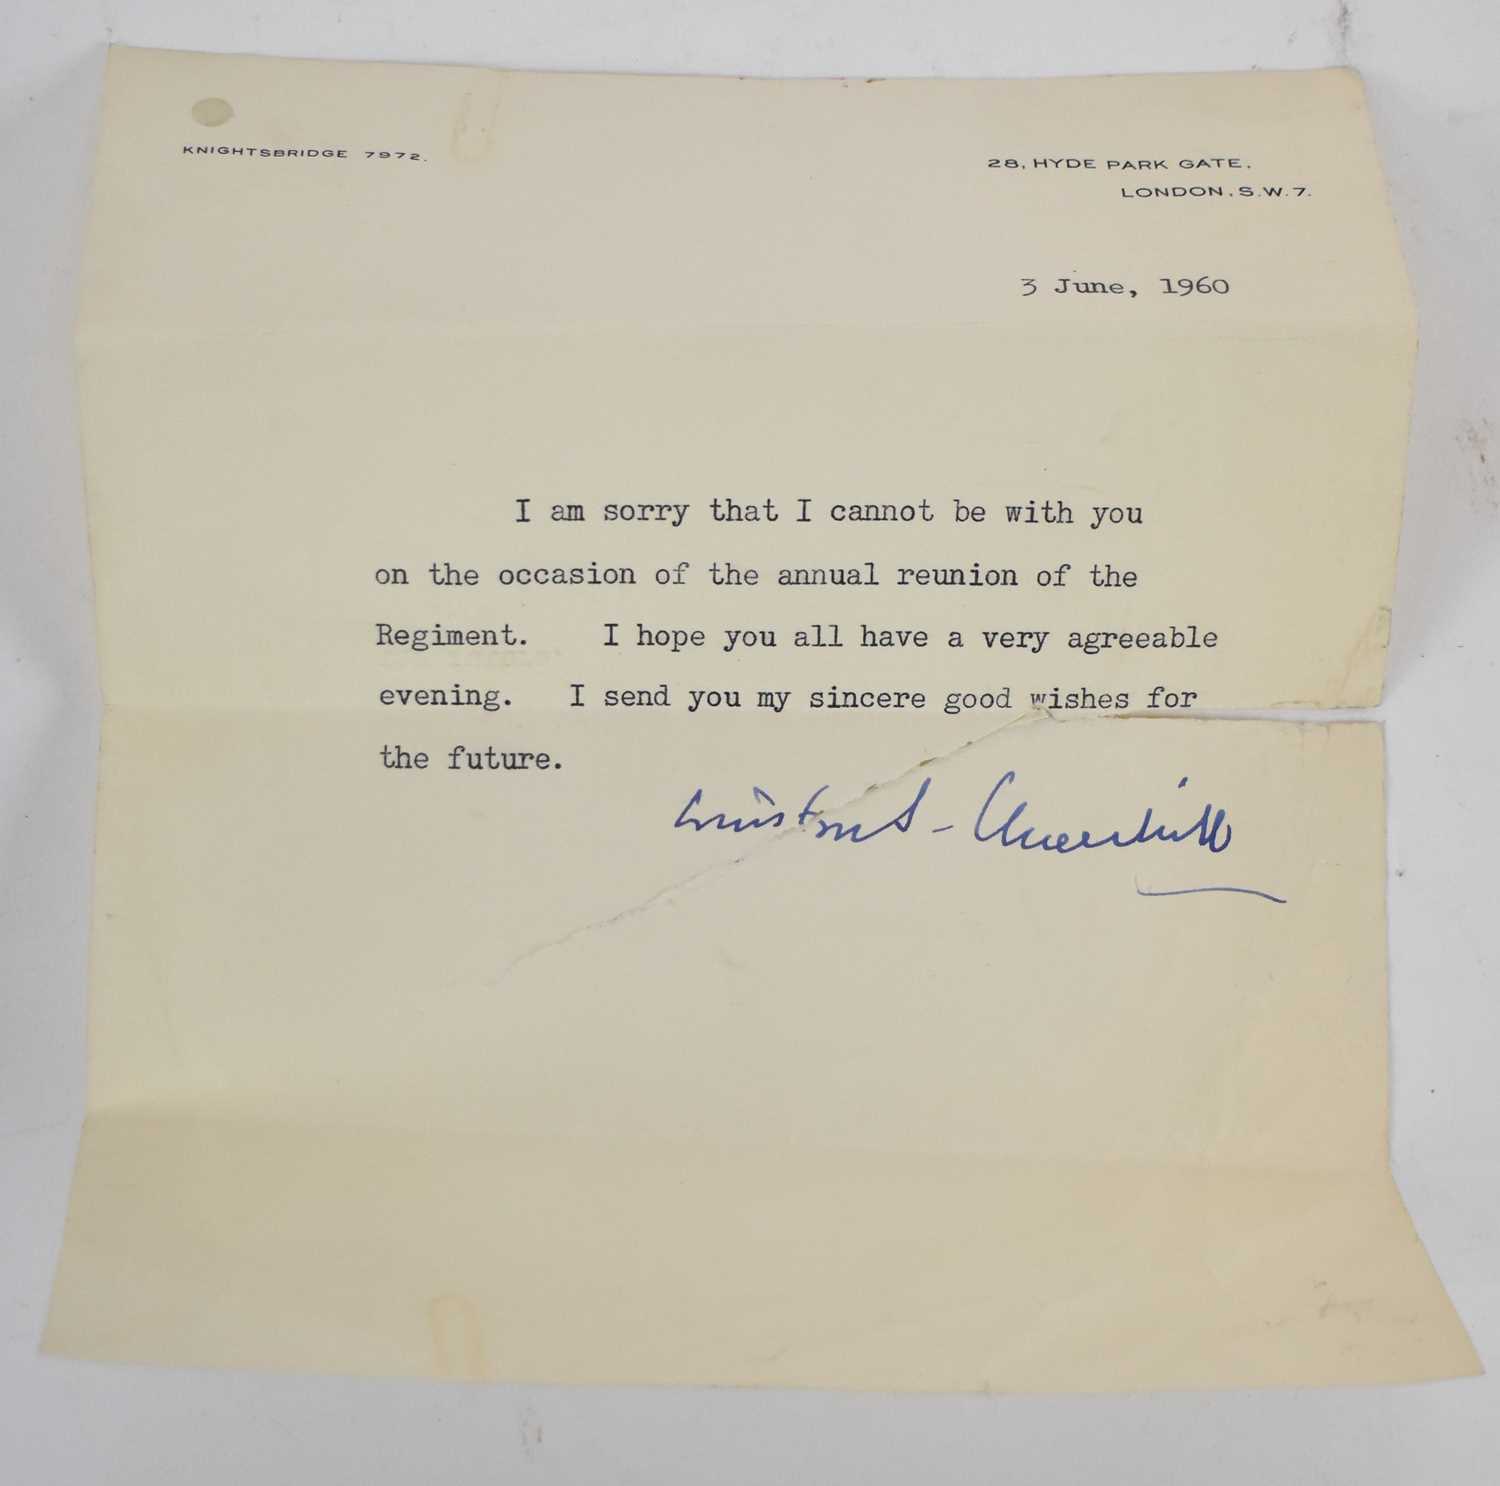 WINSTON CHURCHILL; a hand signed letter in blue ink dated 3 June, 1960 (torn through signature).